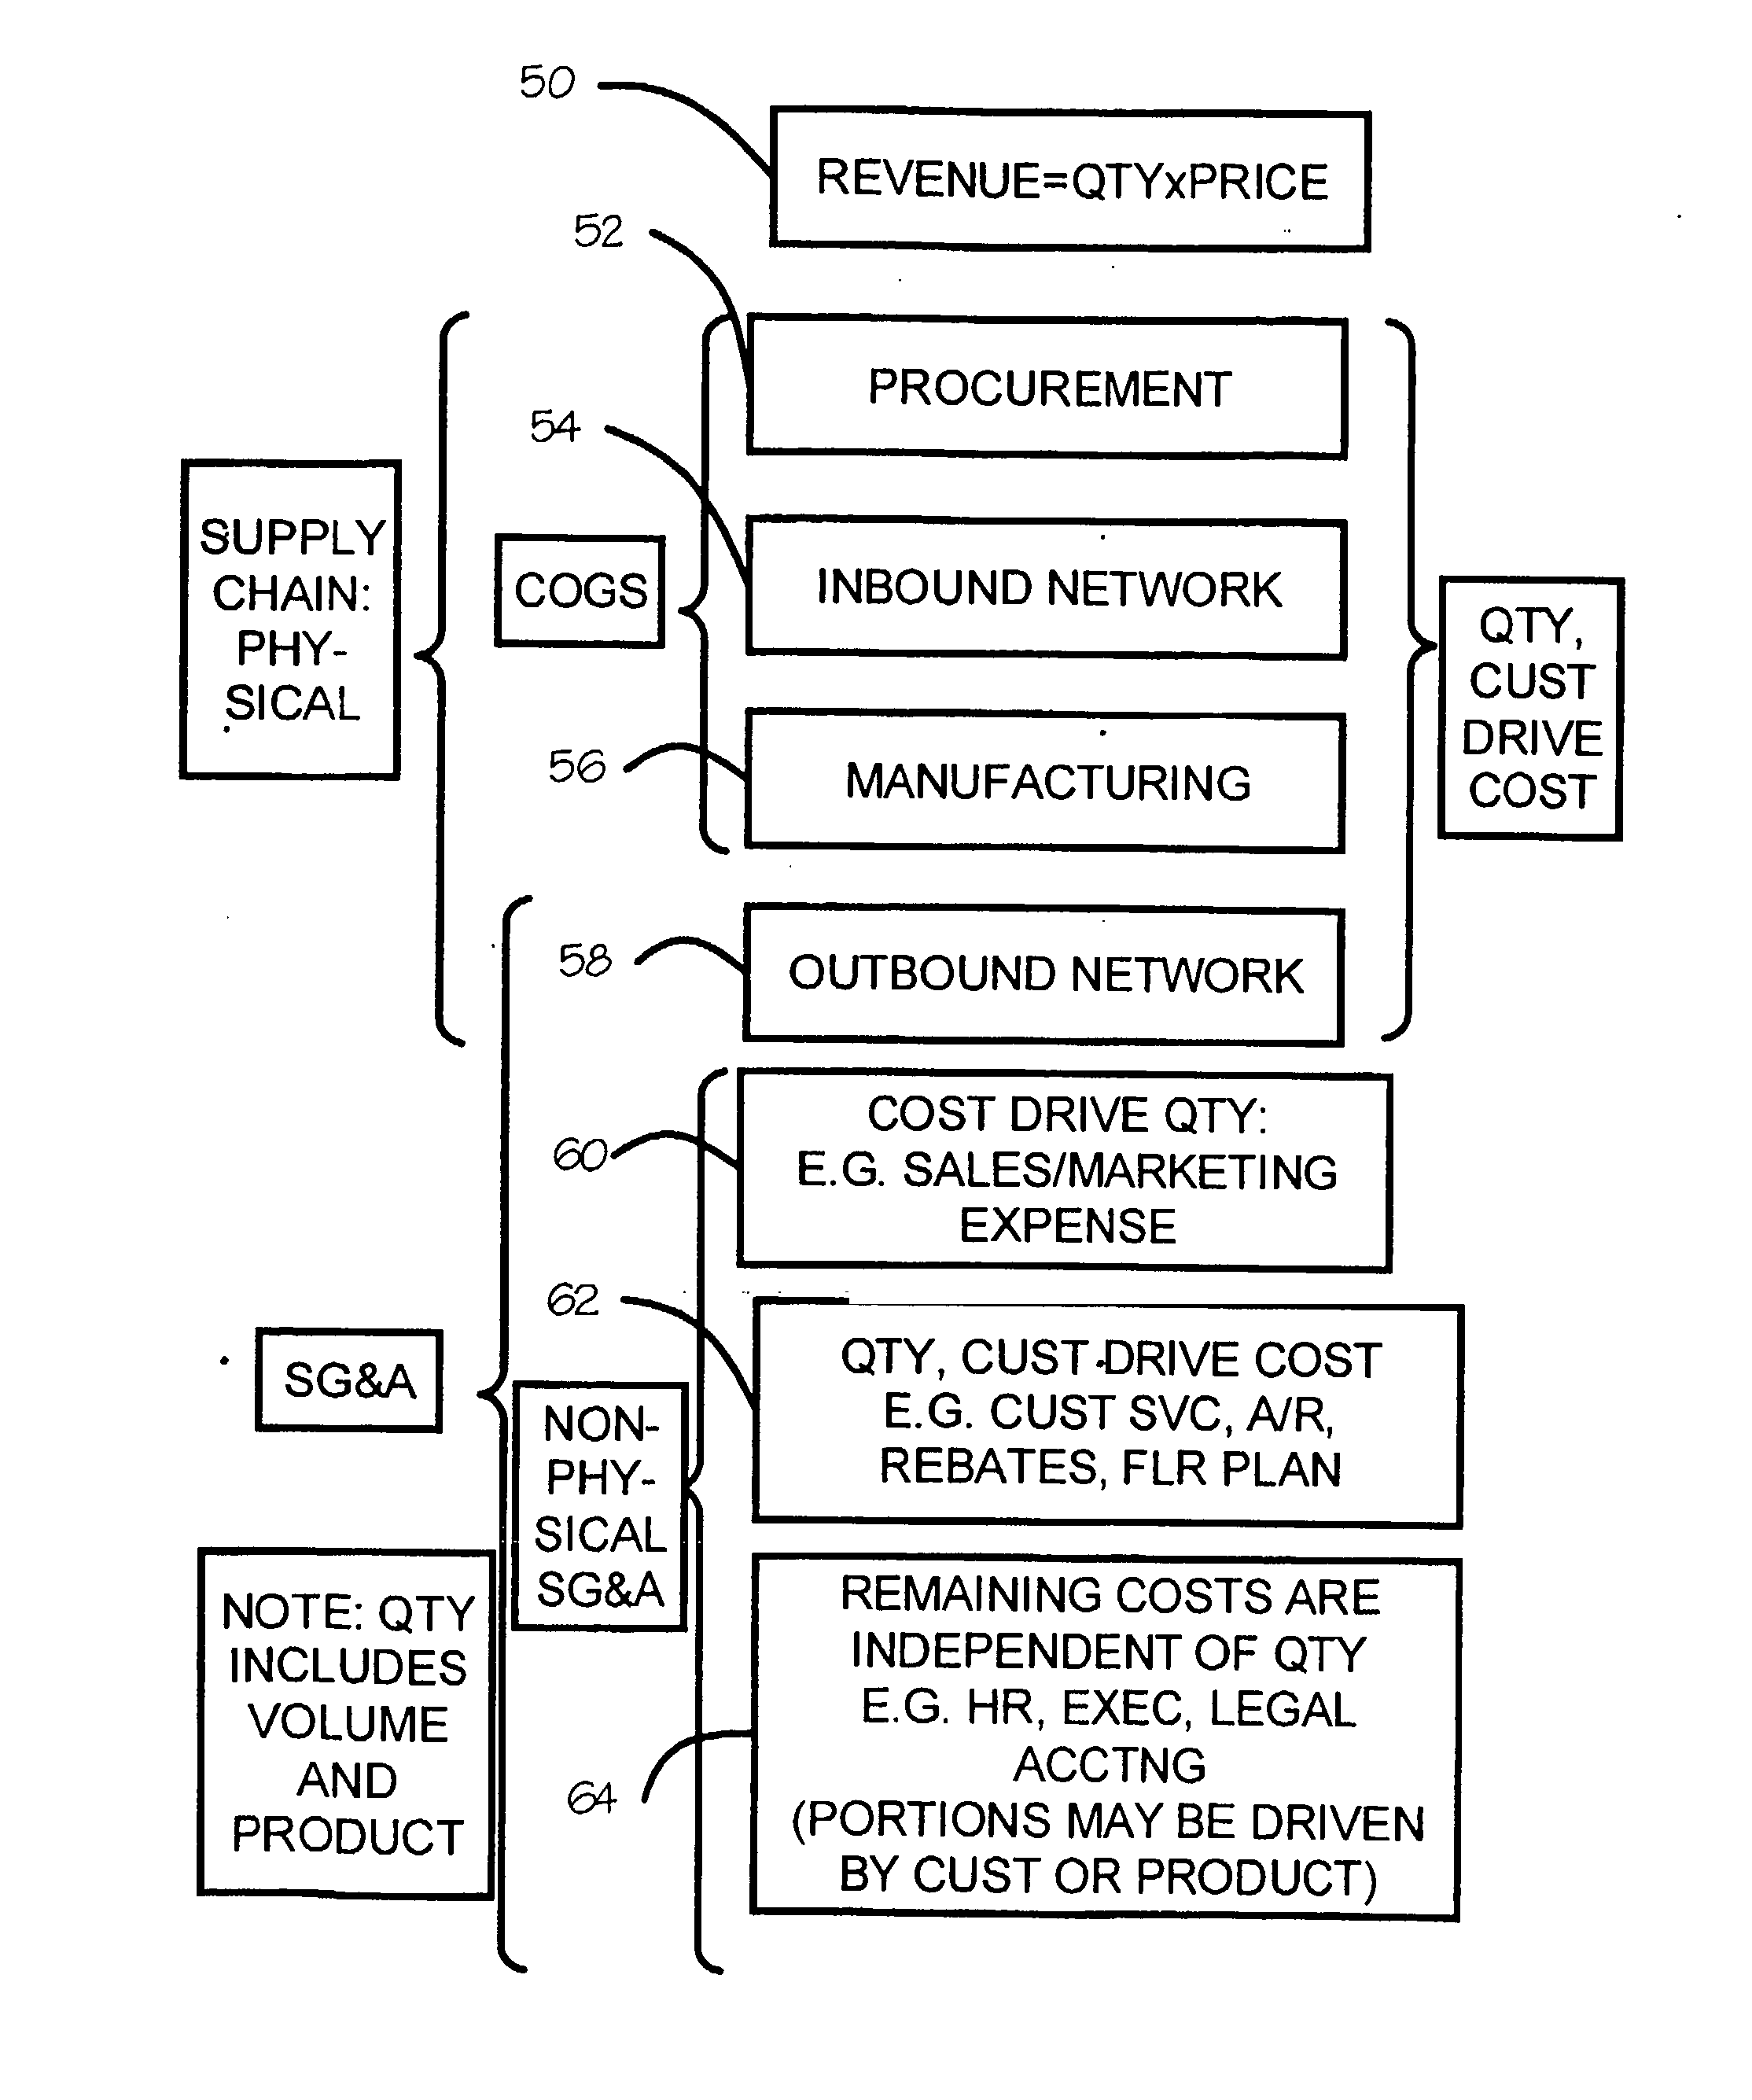 System and Method for Budgeting, Planning, and Supply Chain Management